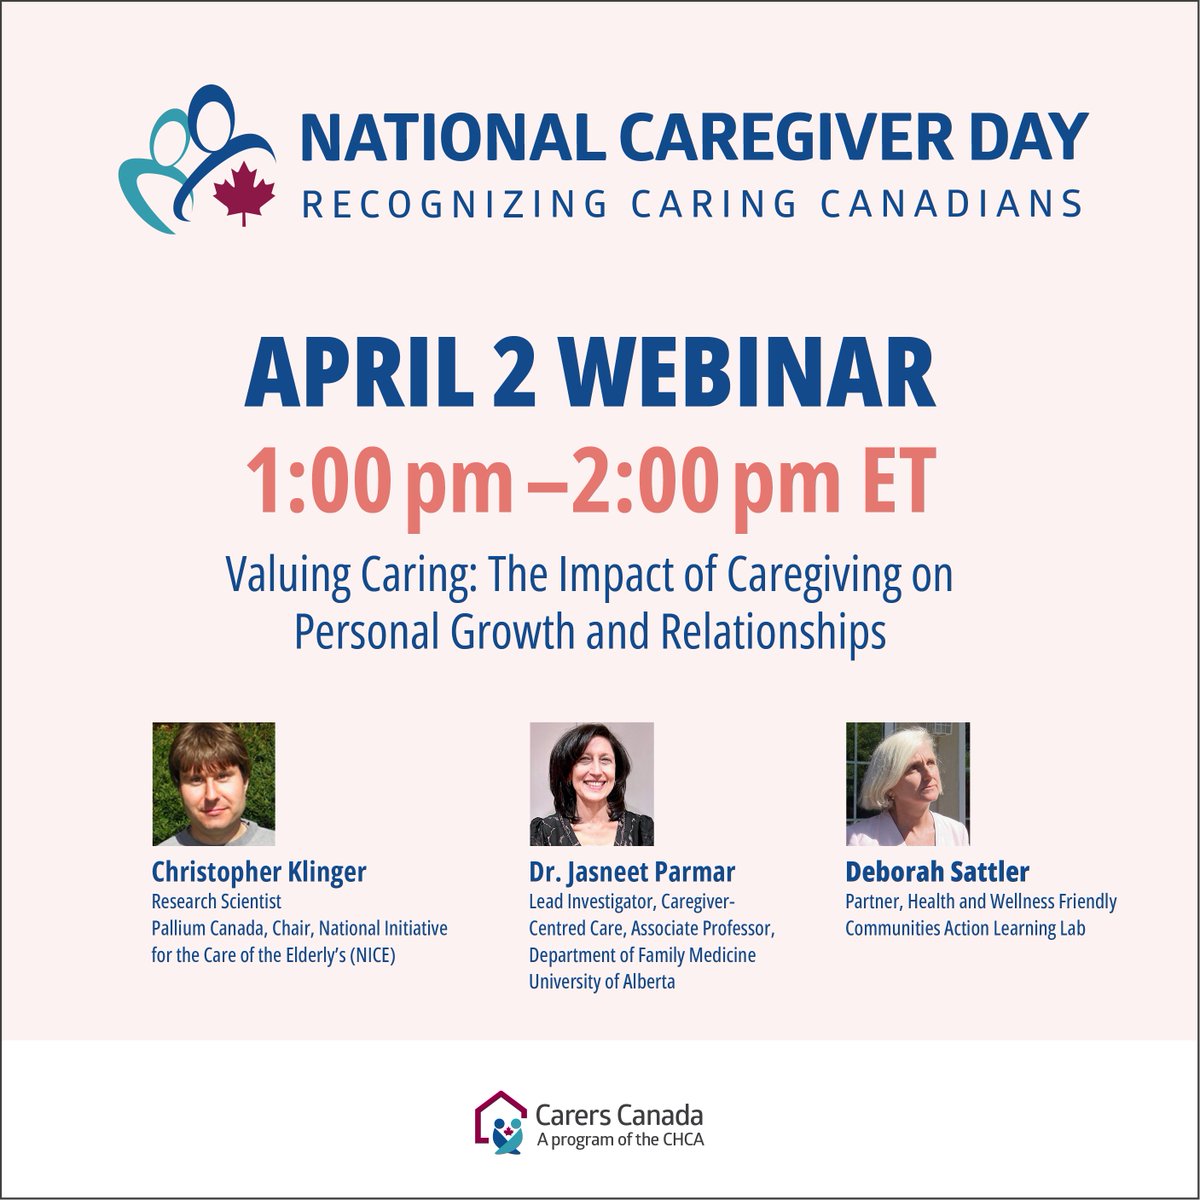 Peer support programs for caregivers offer emotional support and reduce social isolation. Let's promote these vital resources. #NationalCaregiverDay carerscanada.ca/national-careg…